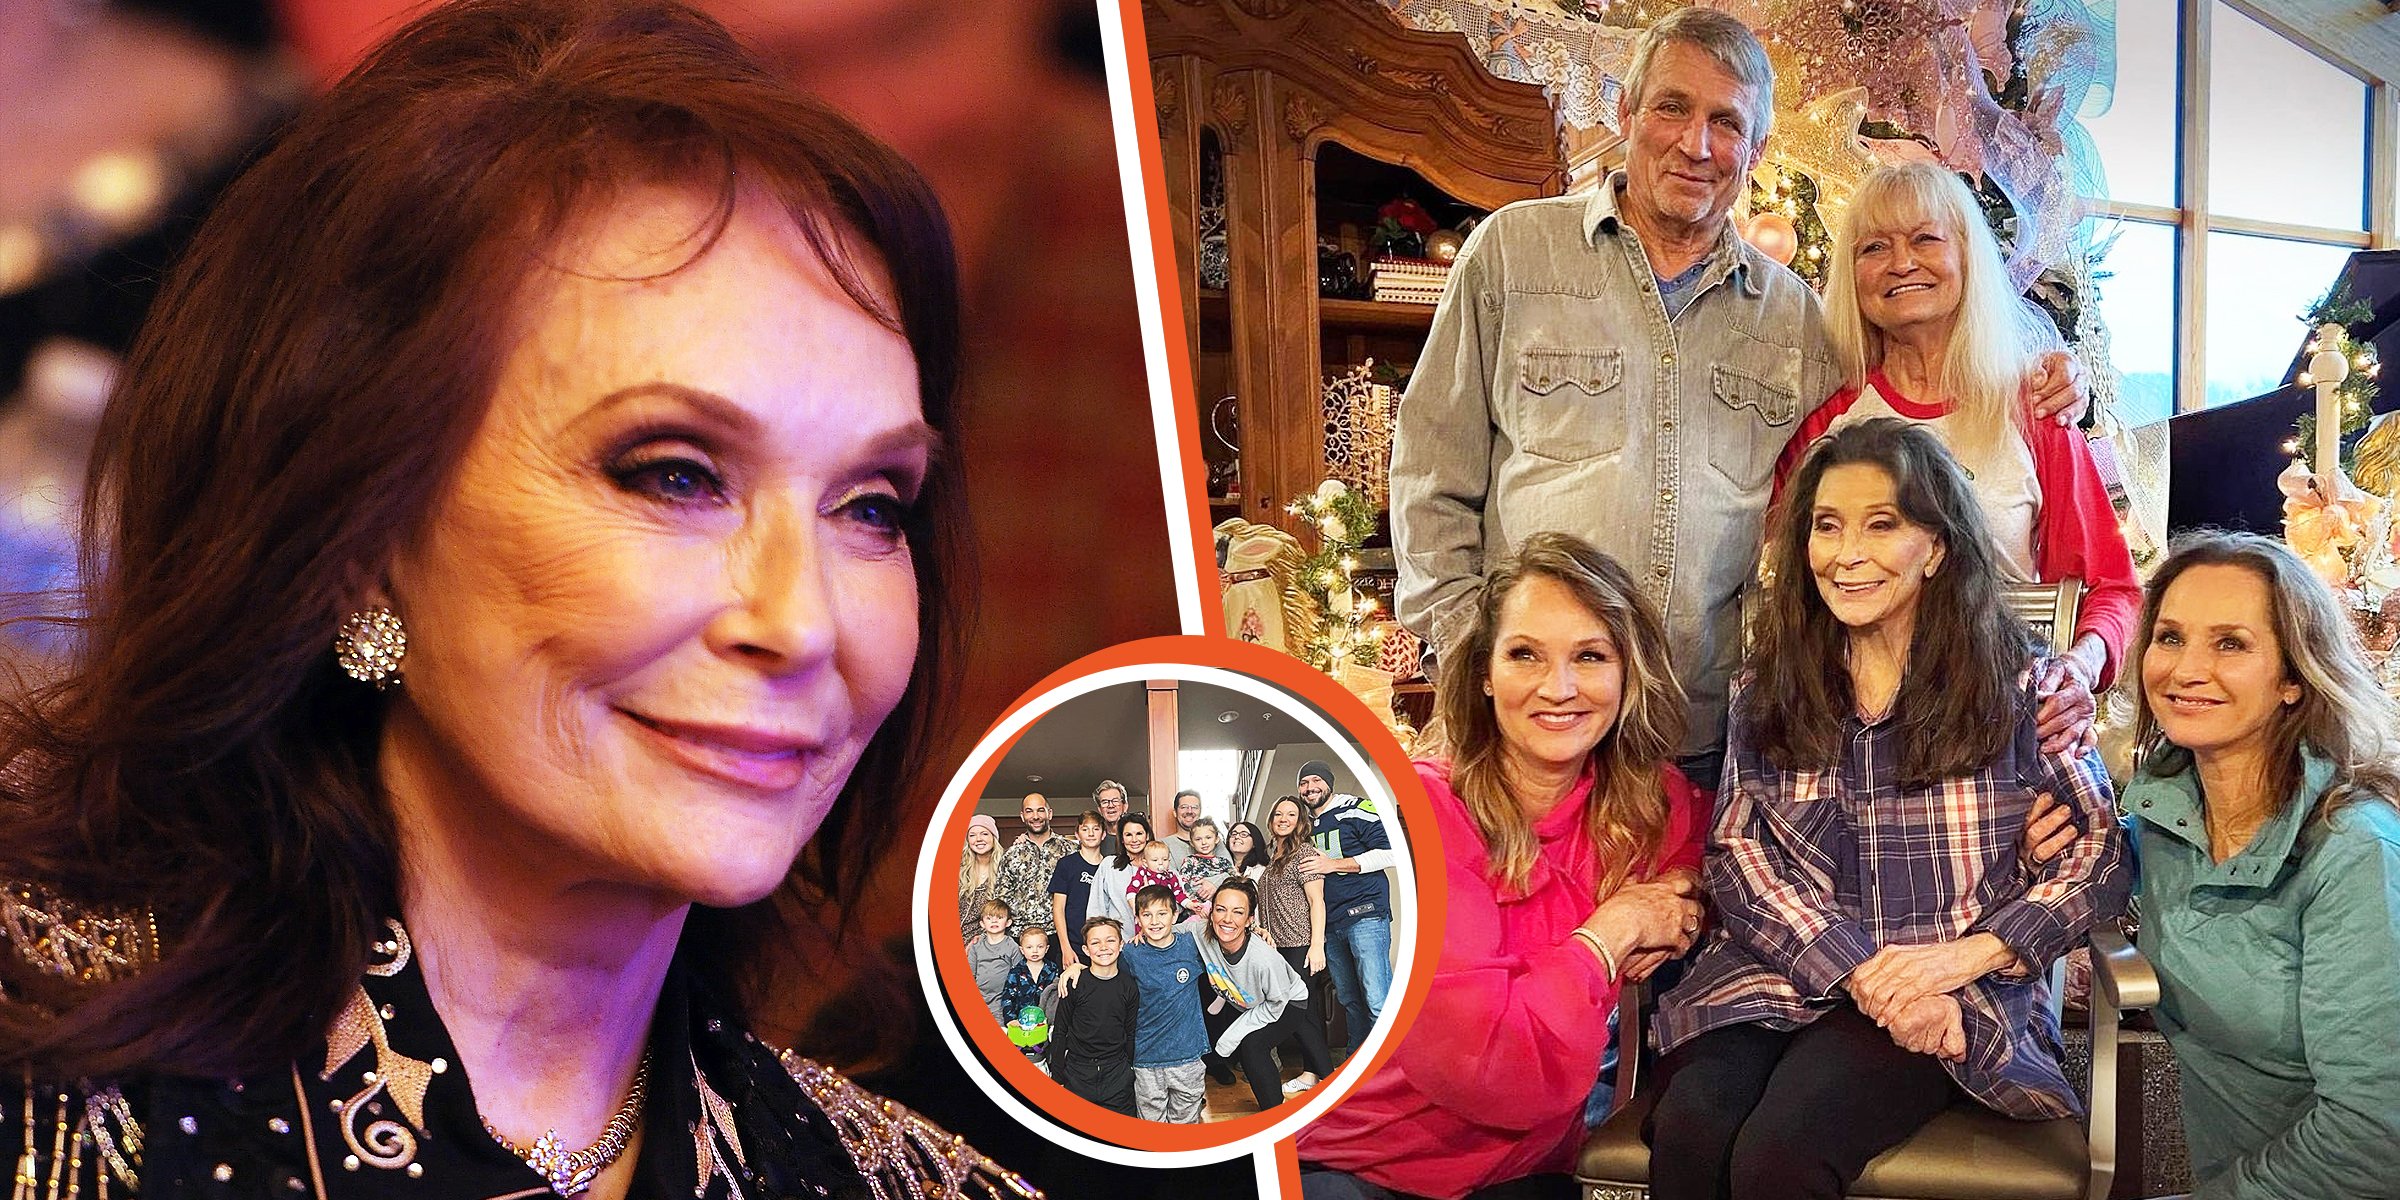 Loretta Lynn | Loretta Lynn and Family | Loretta Lynn, Oliver Lynn and Family | Source: Getty Images | instagram.com/lorettalynnofficial